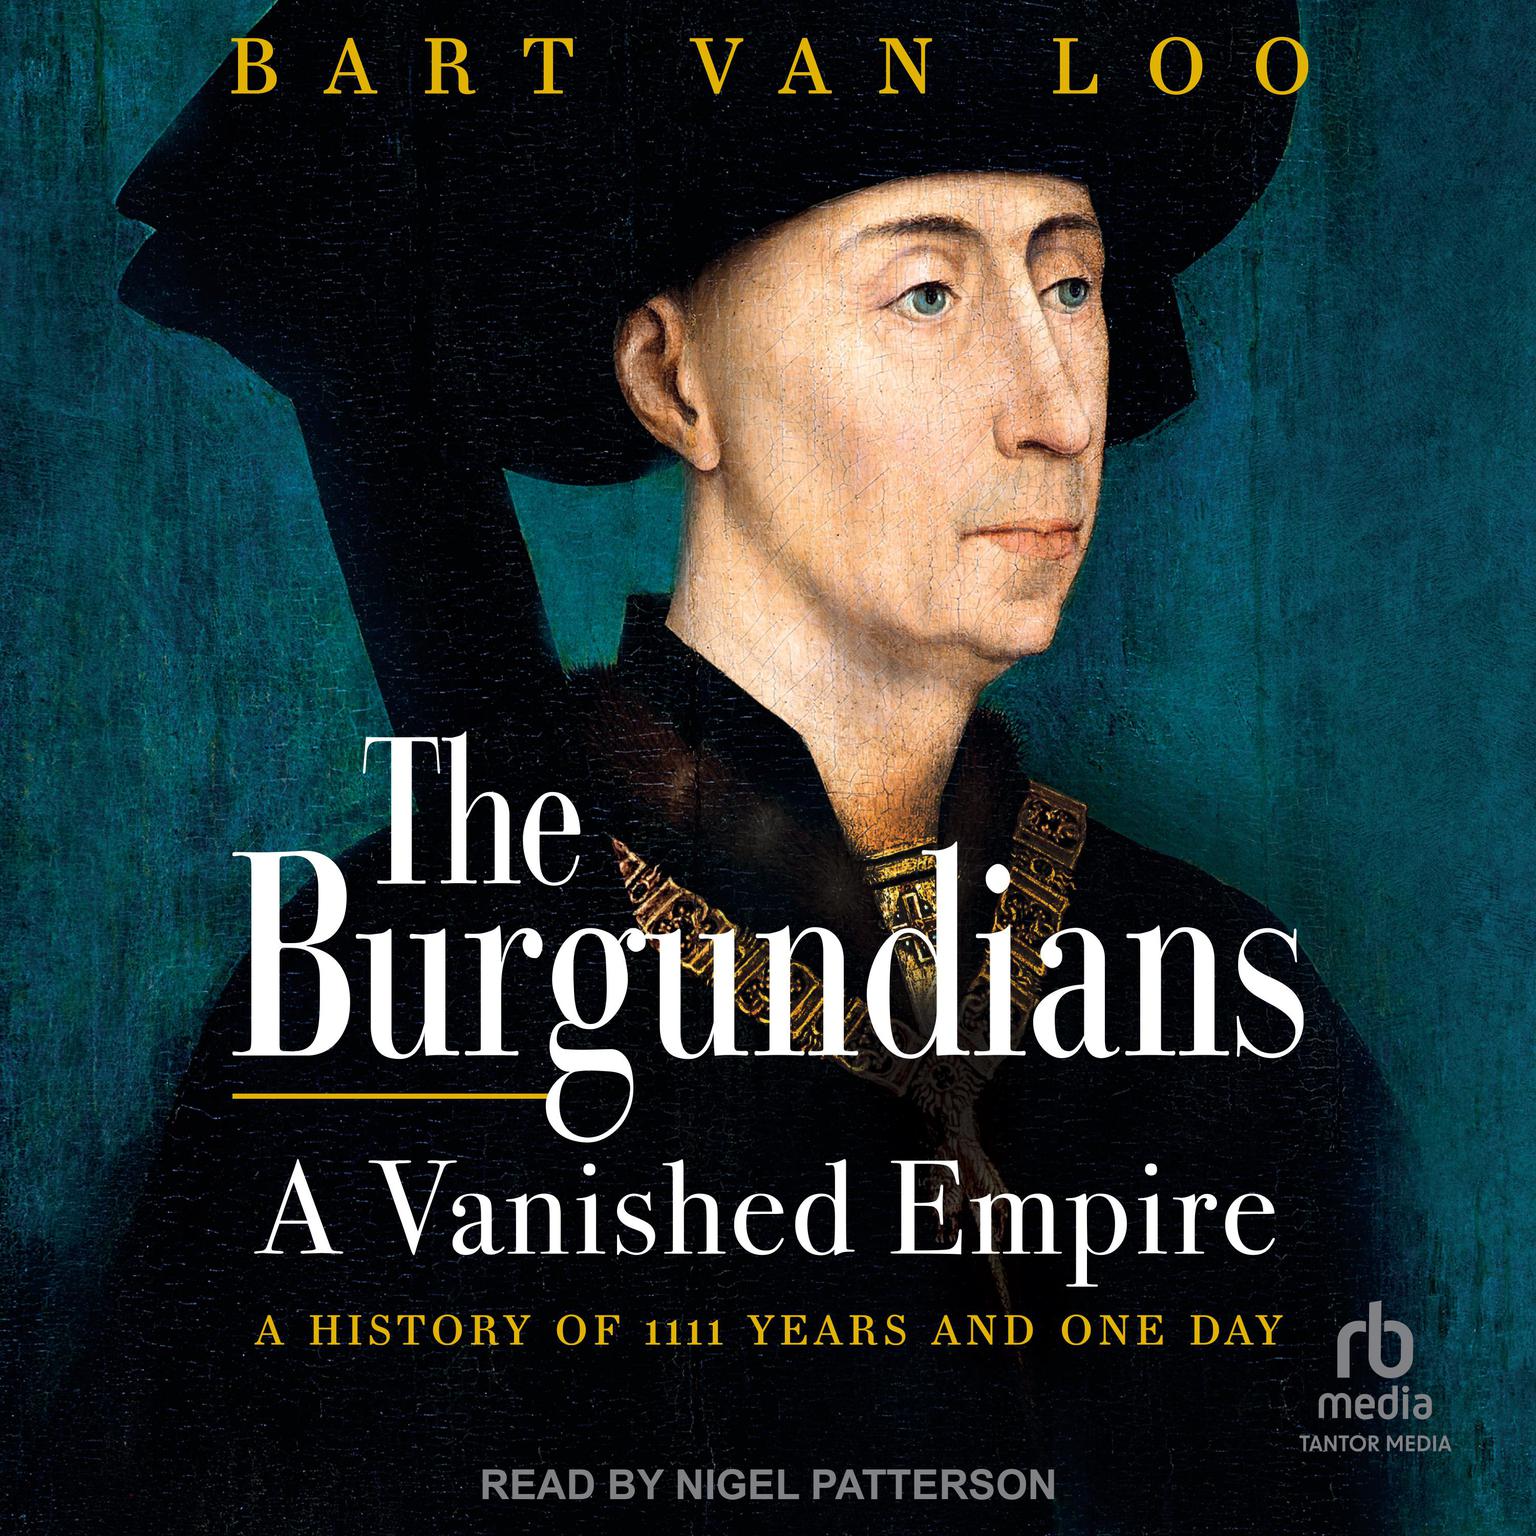 The Burgundians: A Vanished Empire: A History of 1111 Years and One Day Audiobook, by Bart van Loo